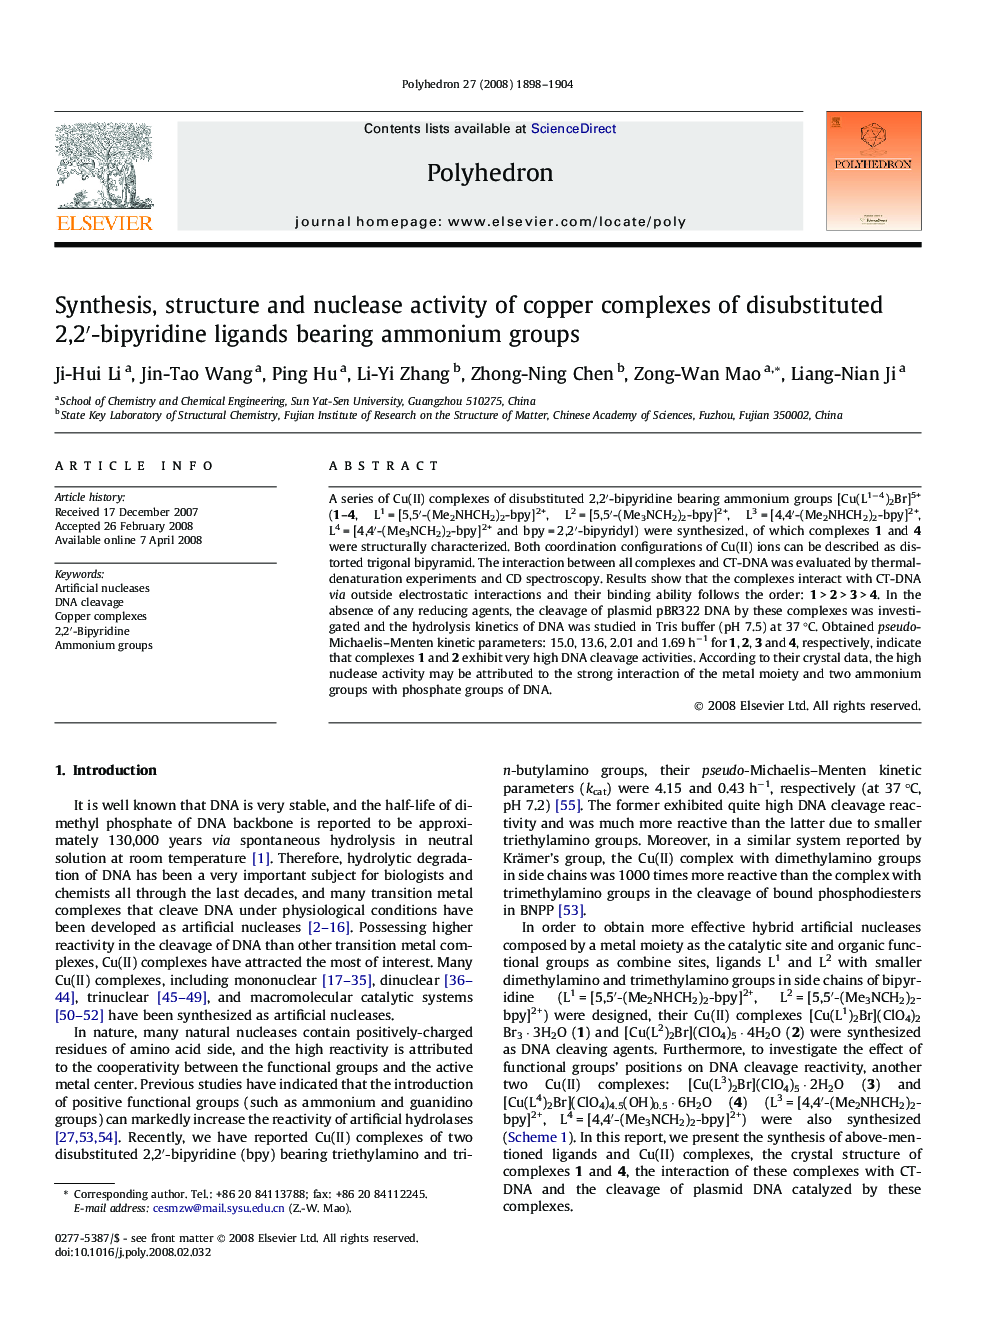 Synthesis, structure and nuclease activity of copper complexes of disubstituted 2,2′-bipyridine ligands bearing ammonium groups